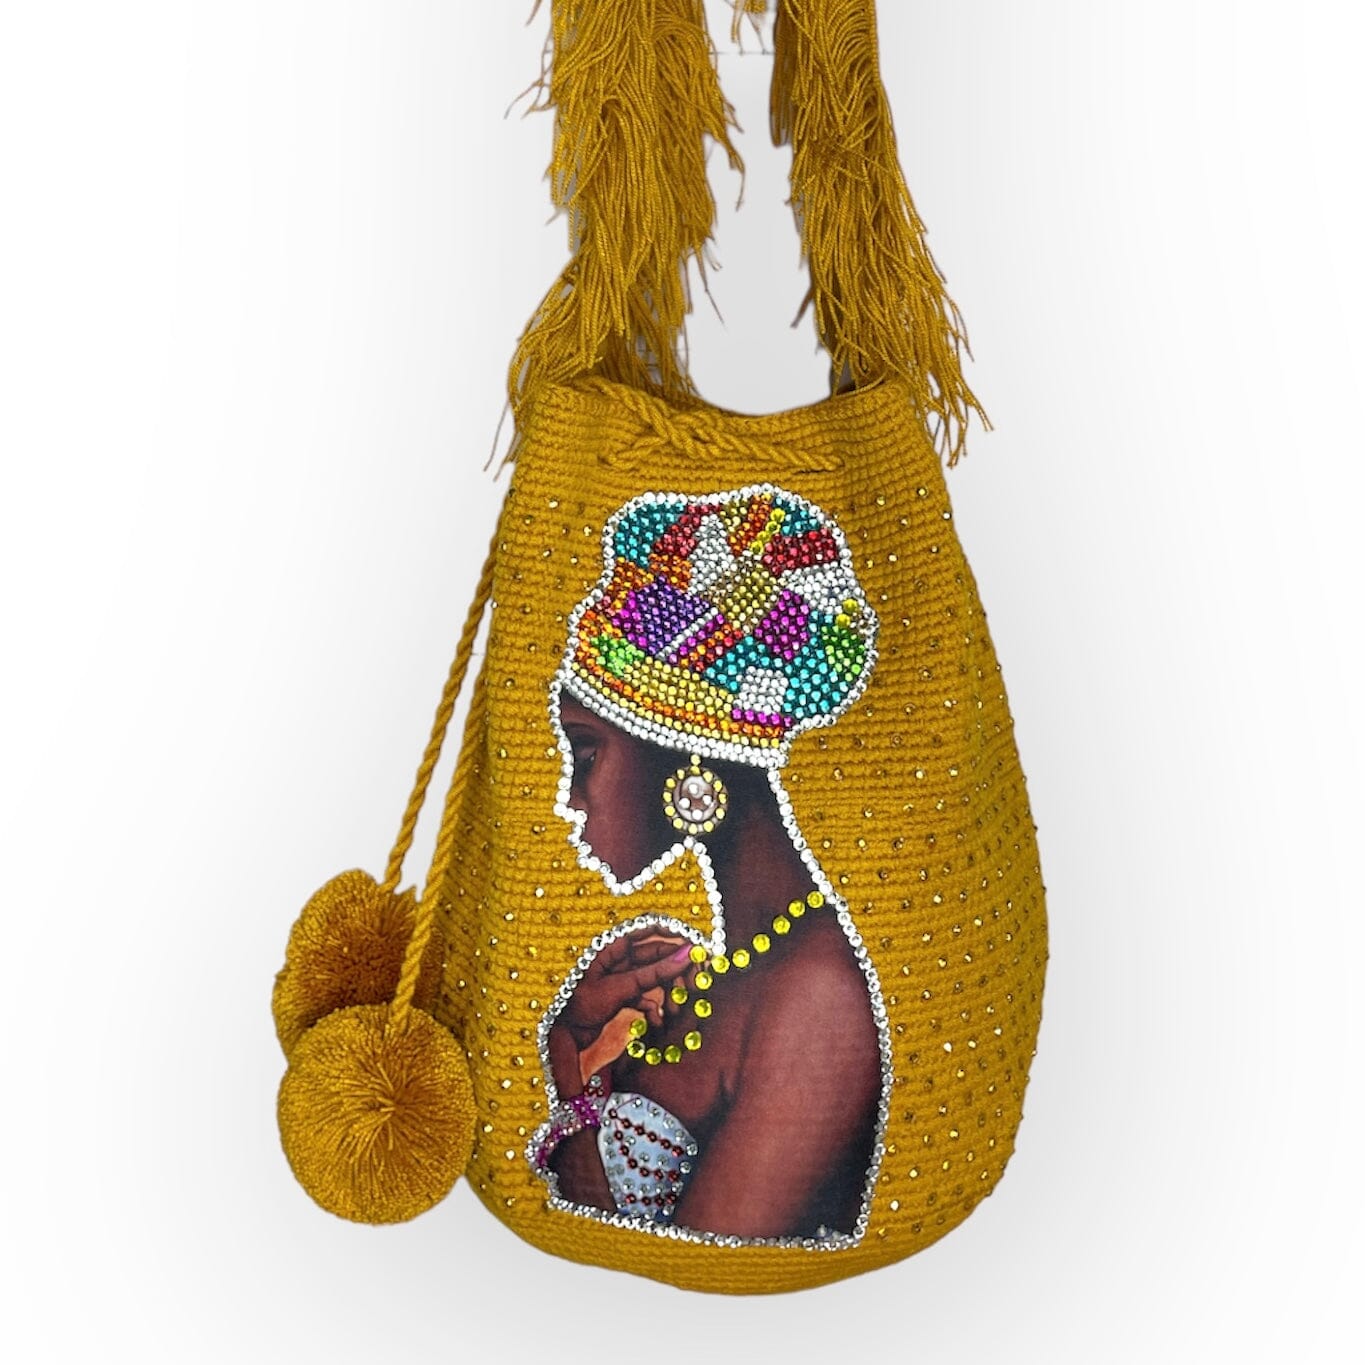 Hanging Large Special Edition Nigerian Women With Crystals and Pompoms | New Arrivals Crystal Embellished Crochet Bags | Colorful 4U